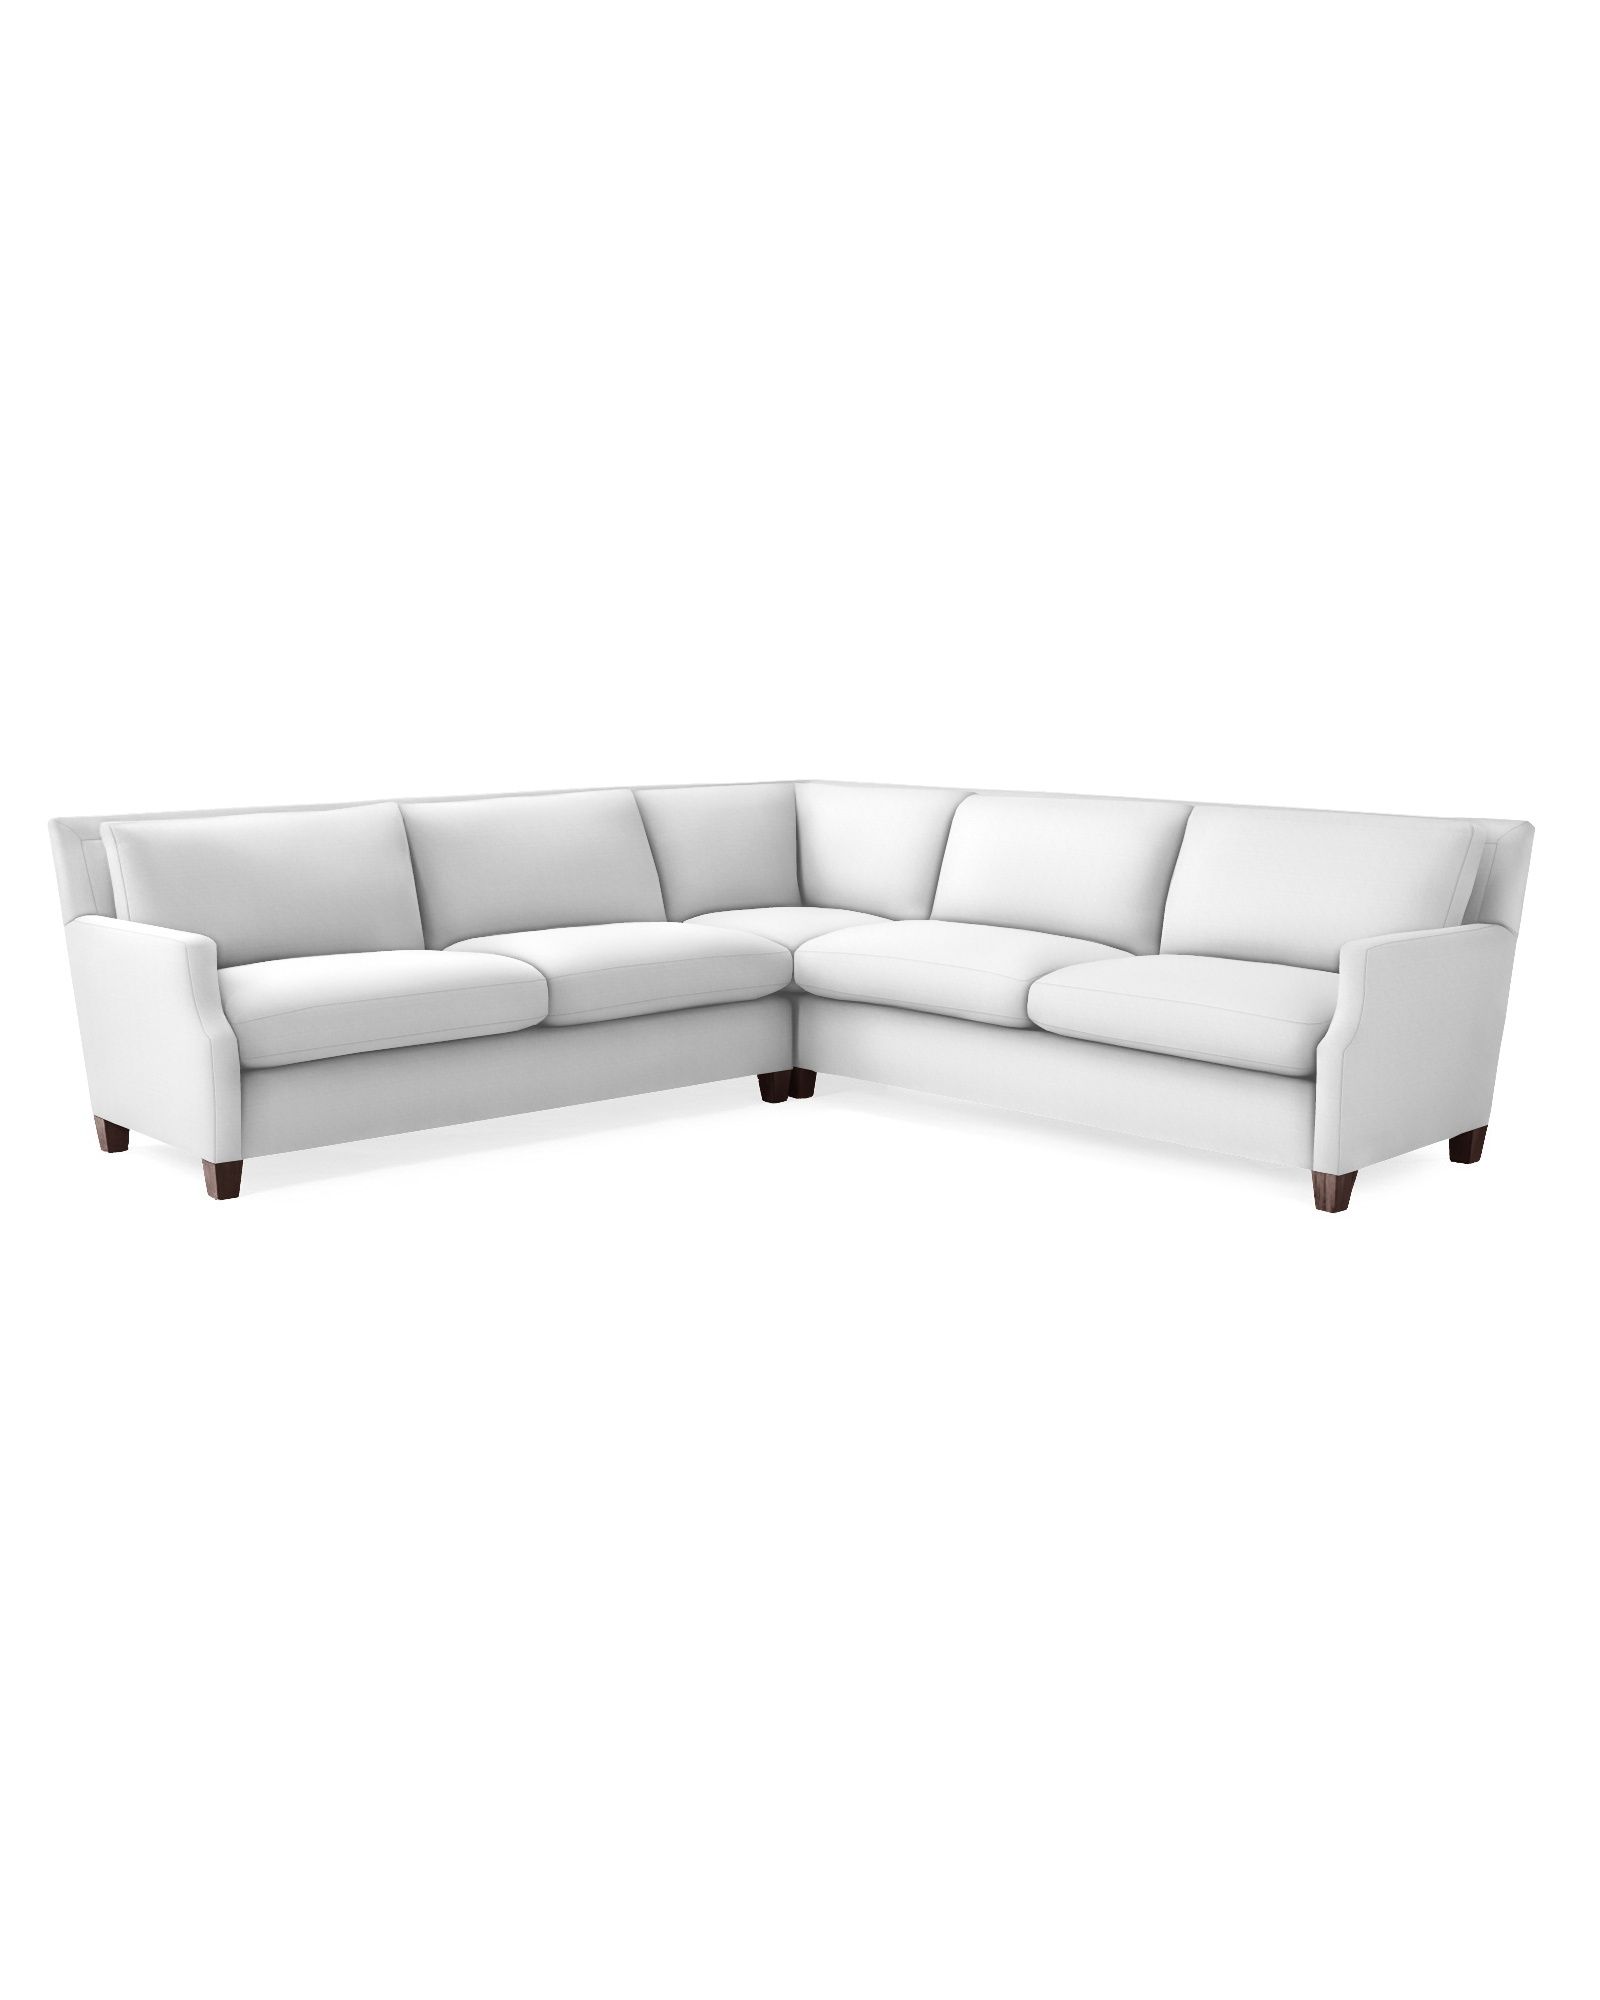 Grady Corner Sectional | Serena and Lily